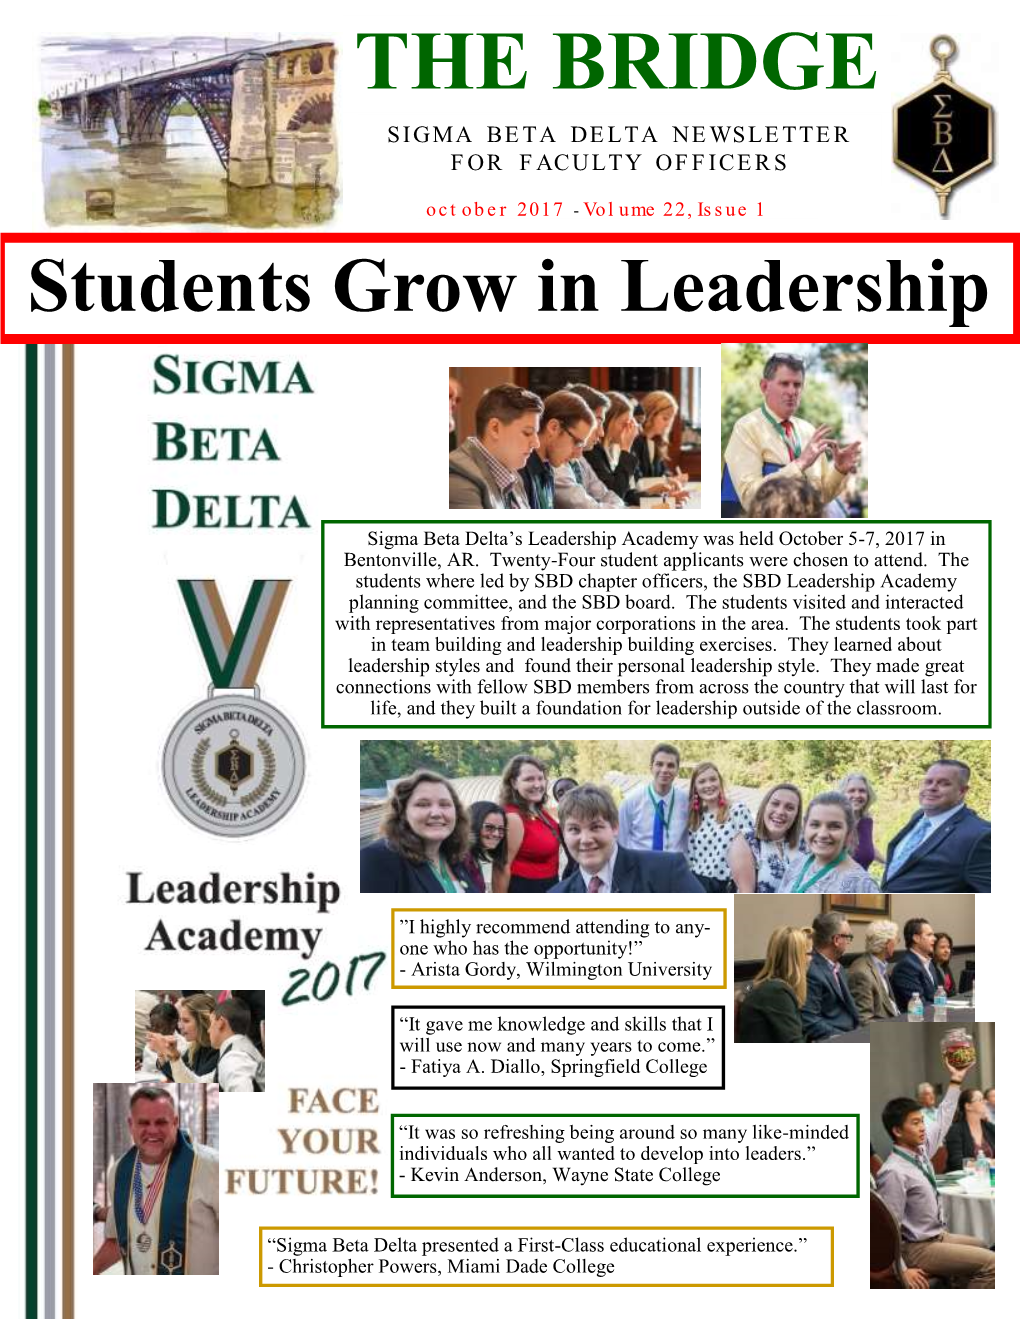 The Bridge Sigma Beta Delta Newsletter for Faculty Officers